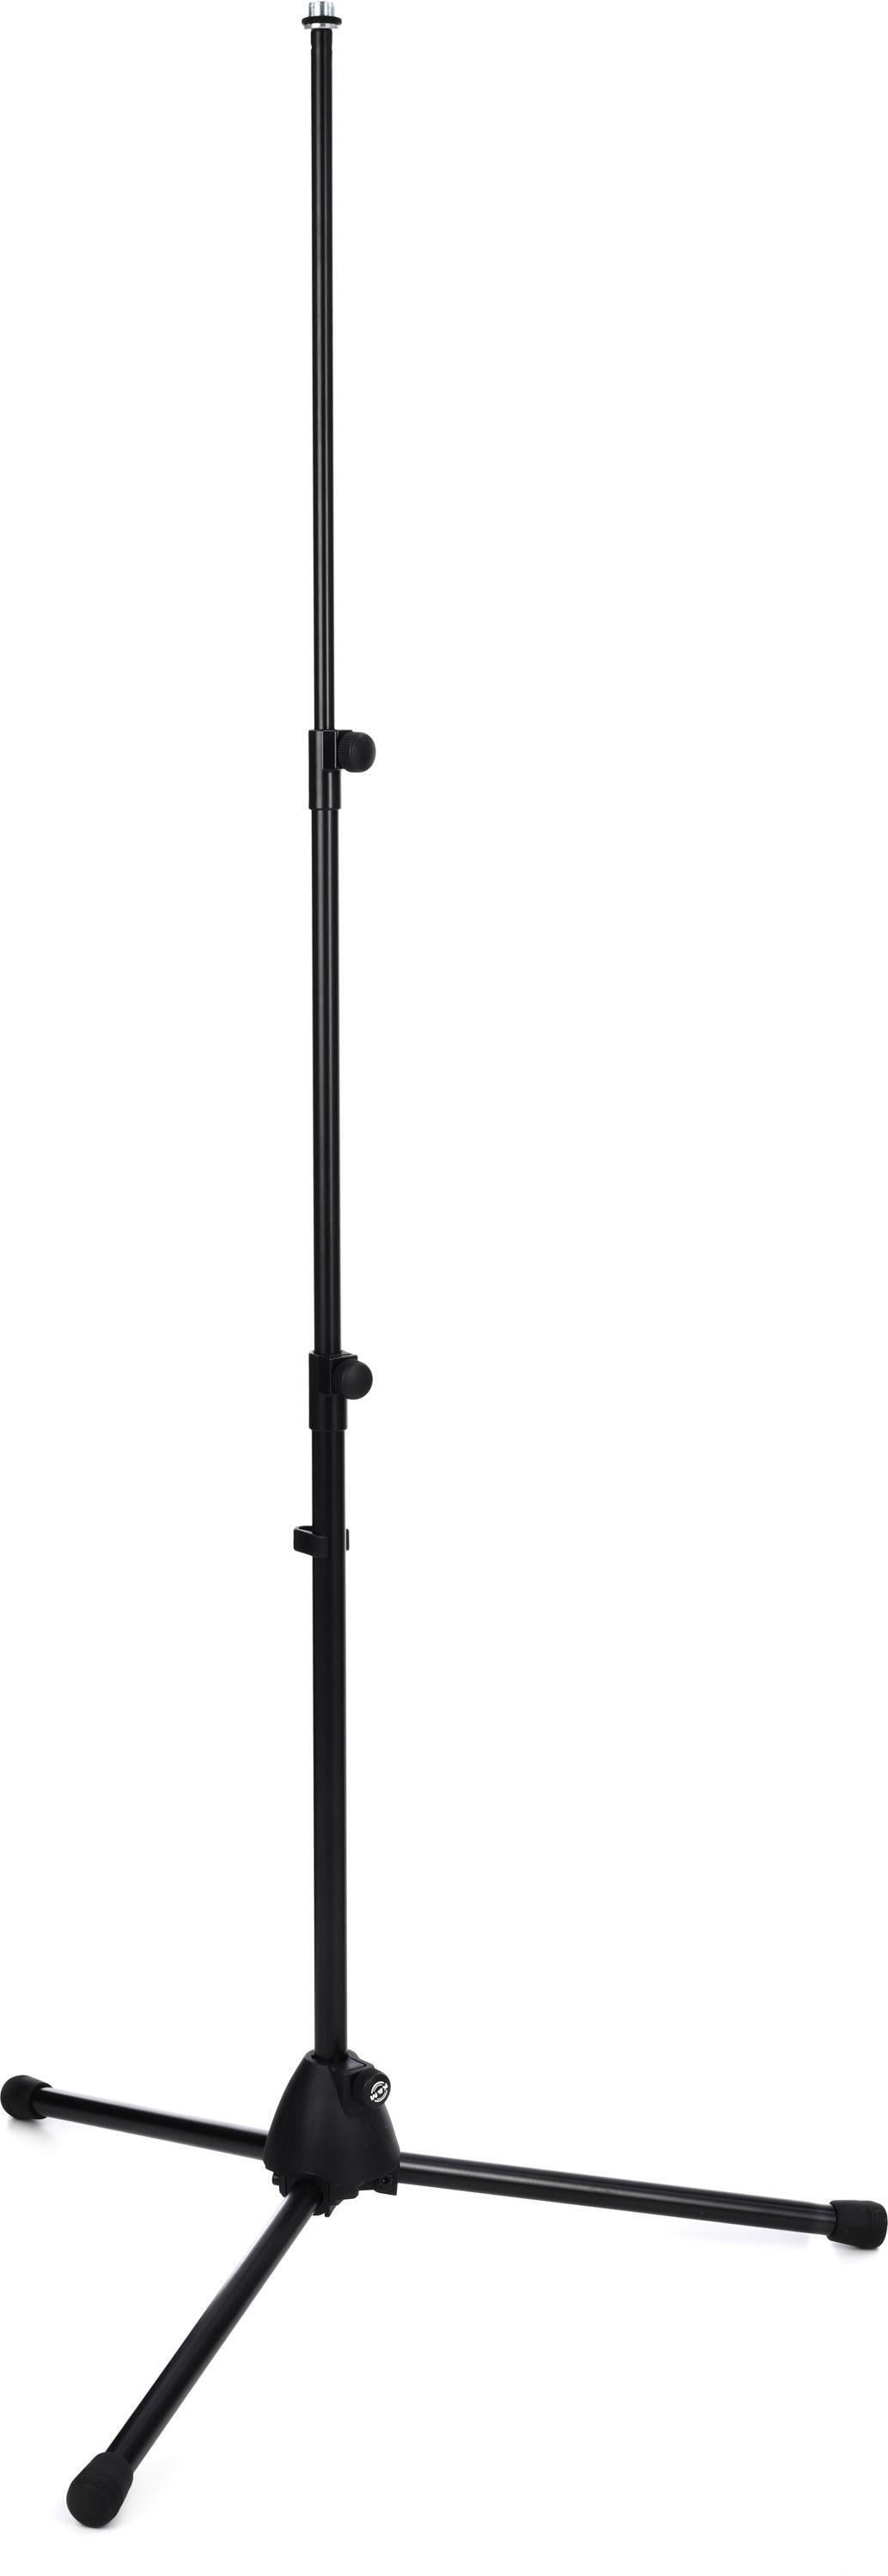 K&M 199 Microphone Stand - Black | Sweetwater